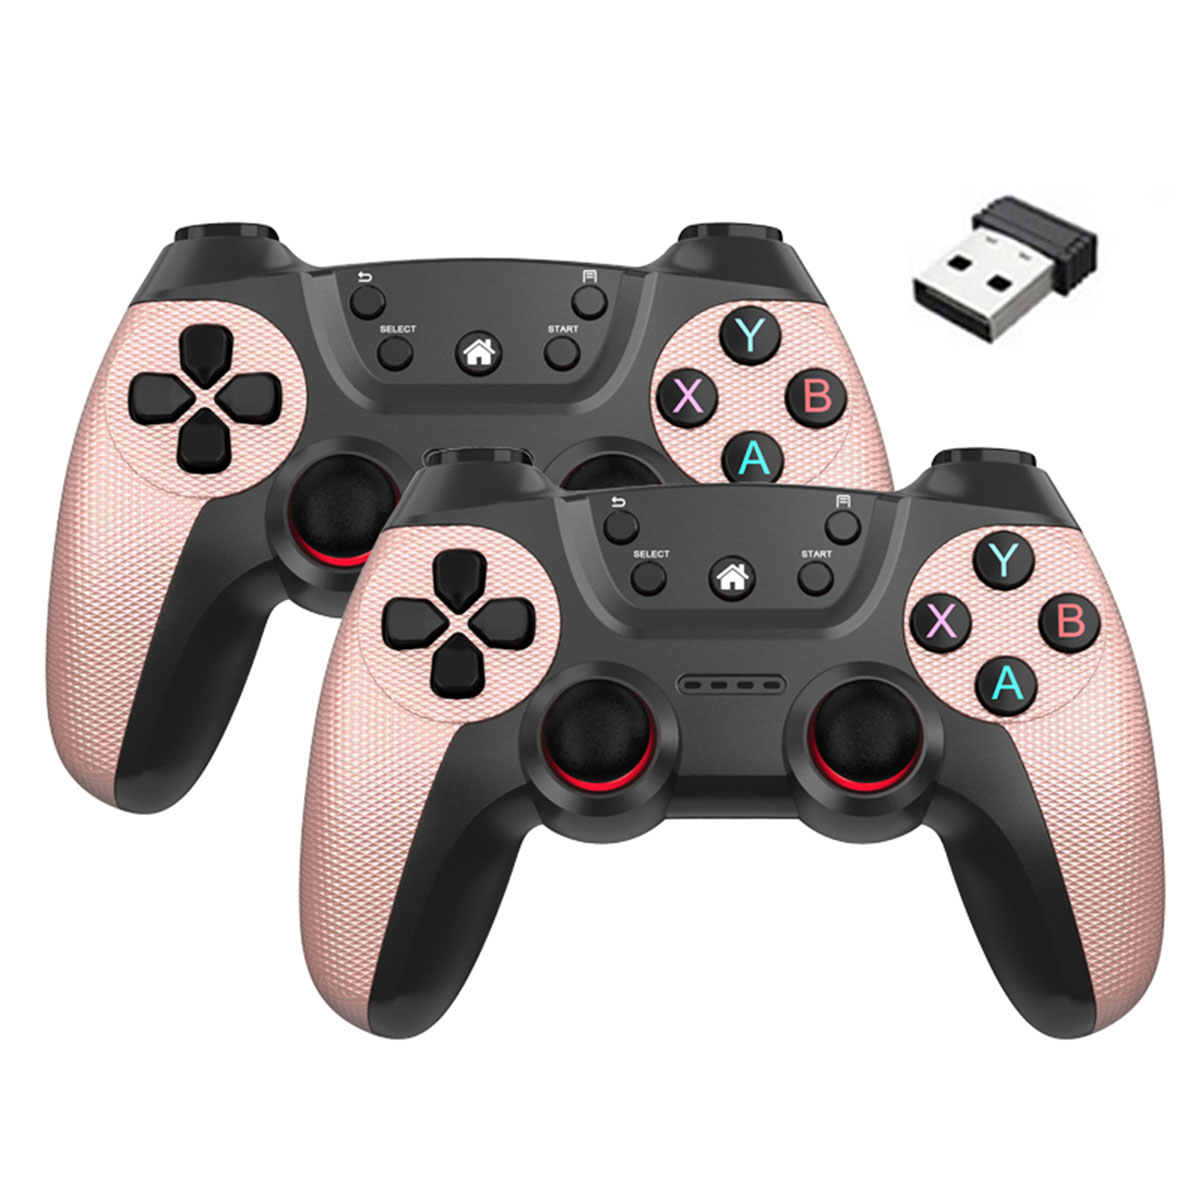 PC,Android RESPIEL Gamepad,Android-Controller,Gamepad,2.4G,für Rosenrosa Doppeltes Wireless Controller